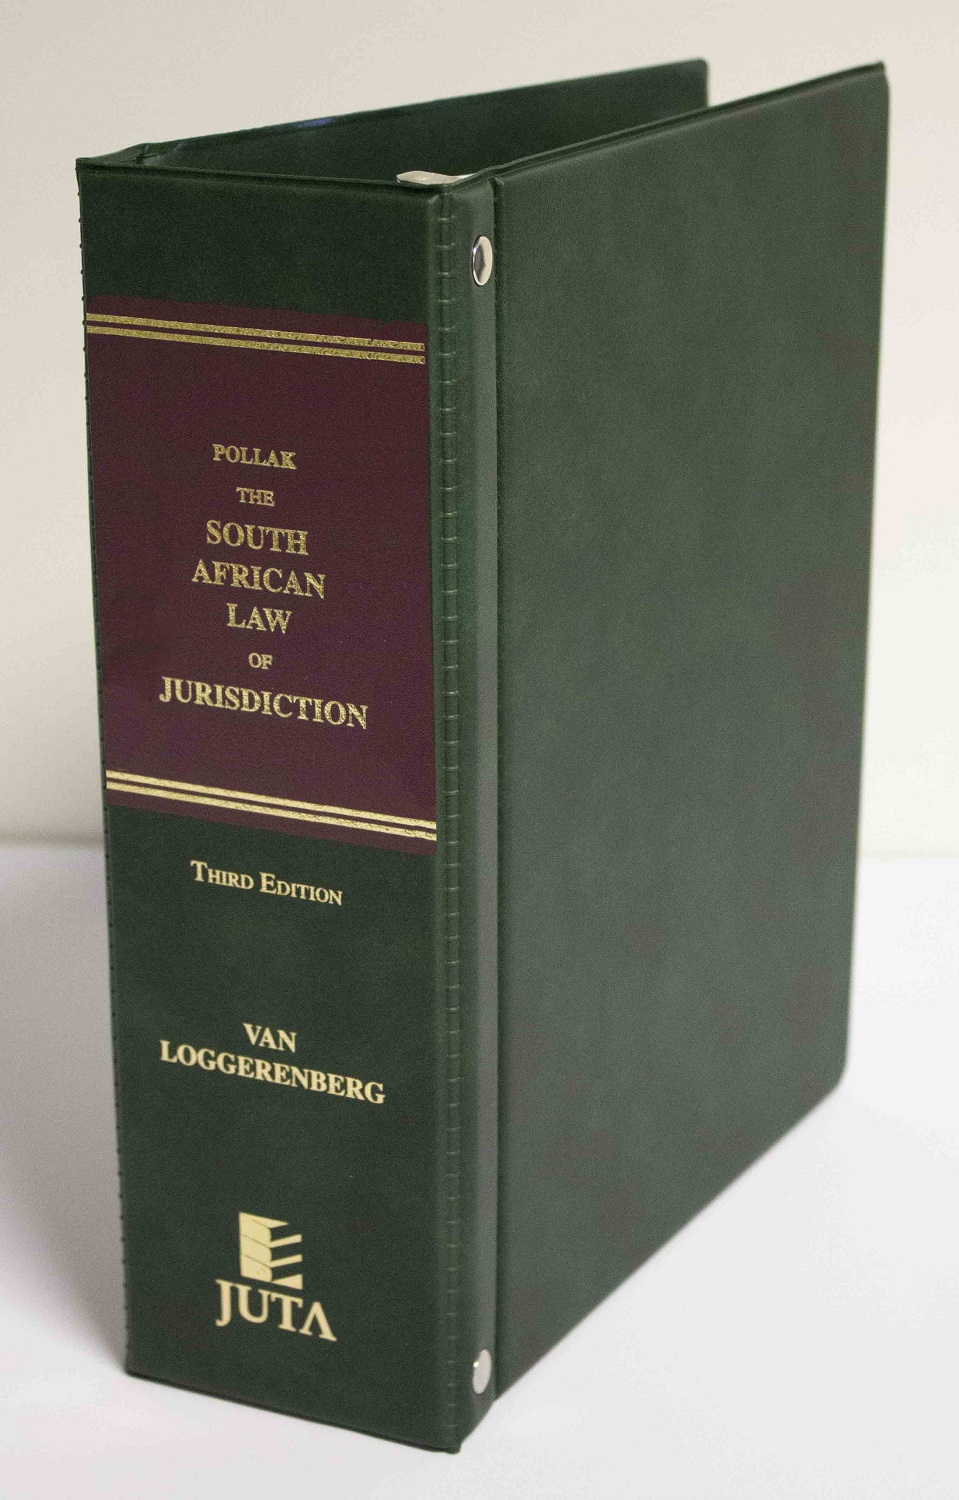 Pollak: The South African Law of Jurisdiction